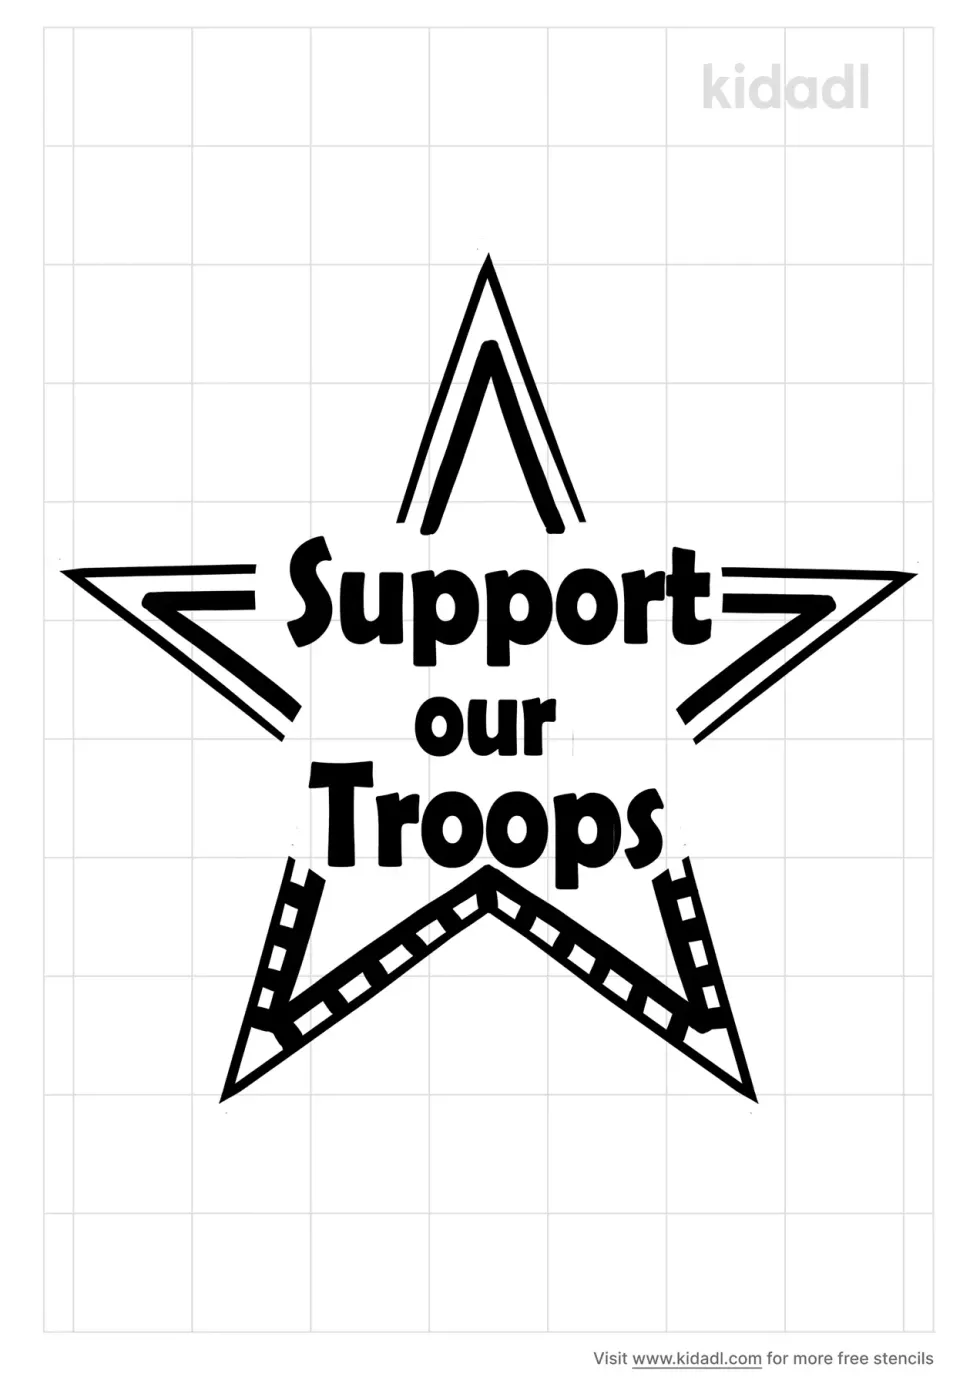 Support The Troops